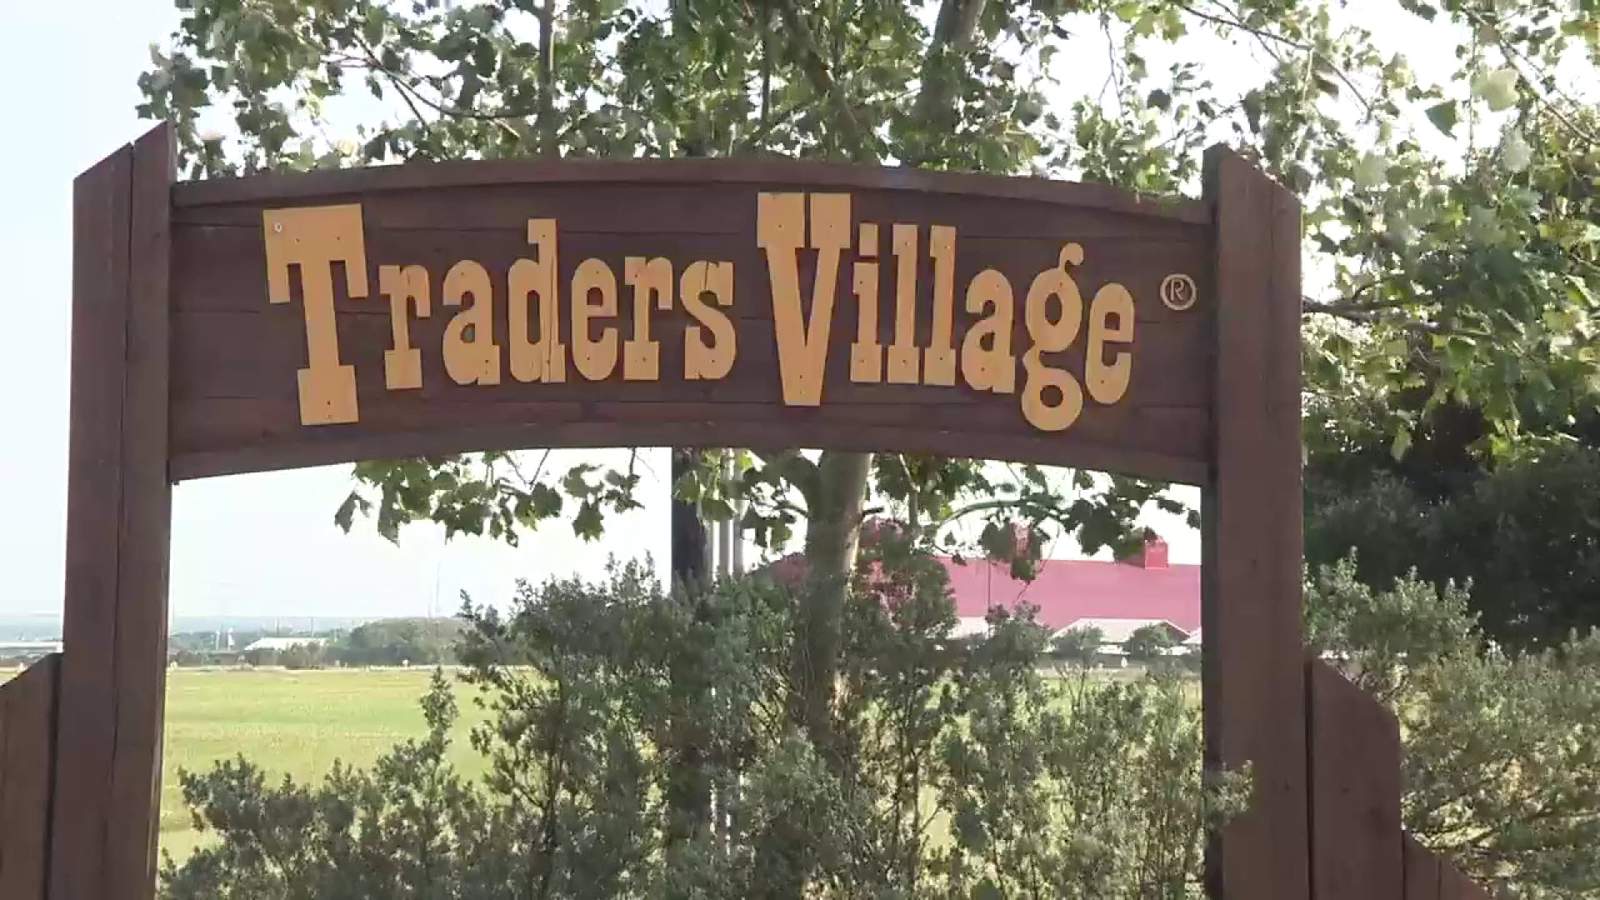 Traders Village flea market not given all clear to open by city